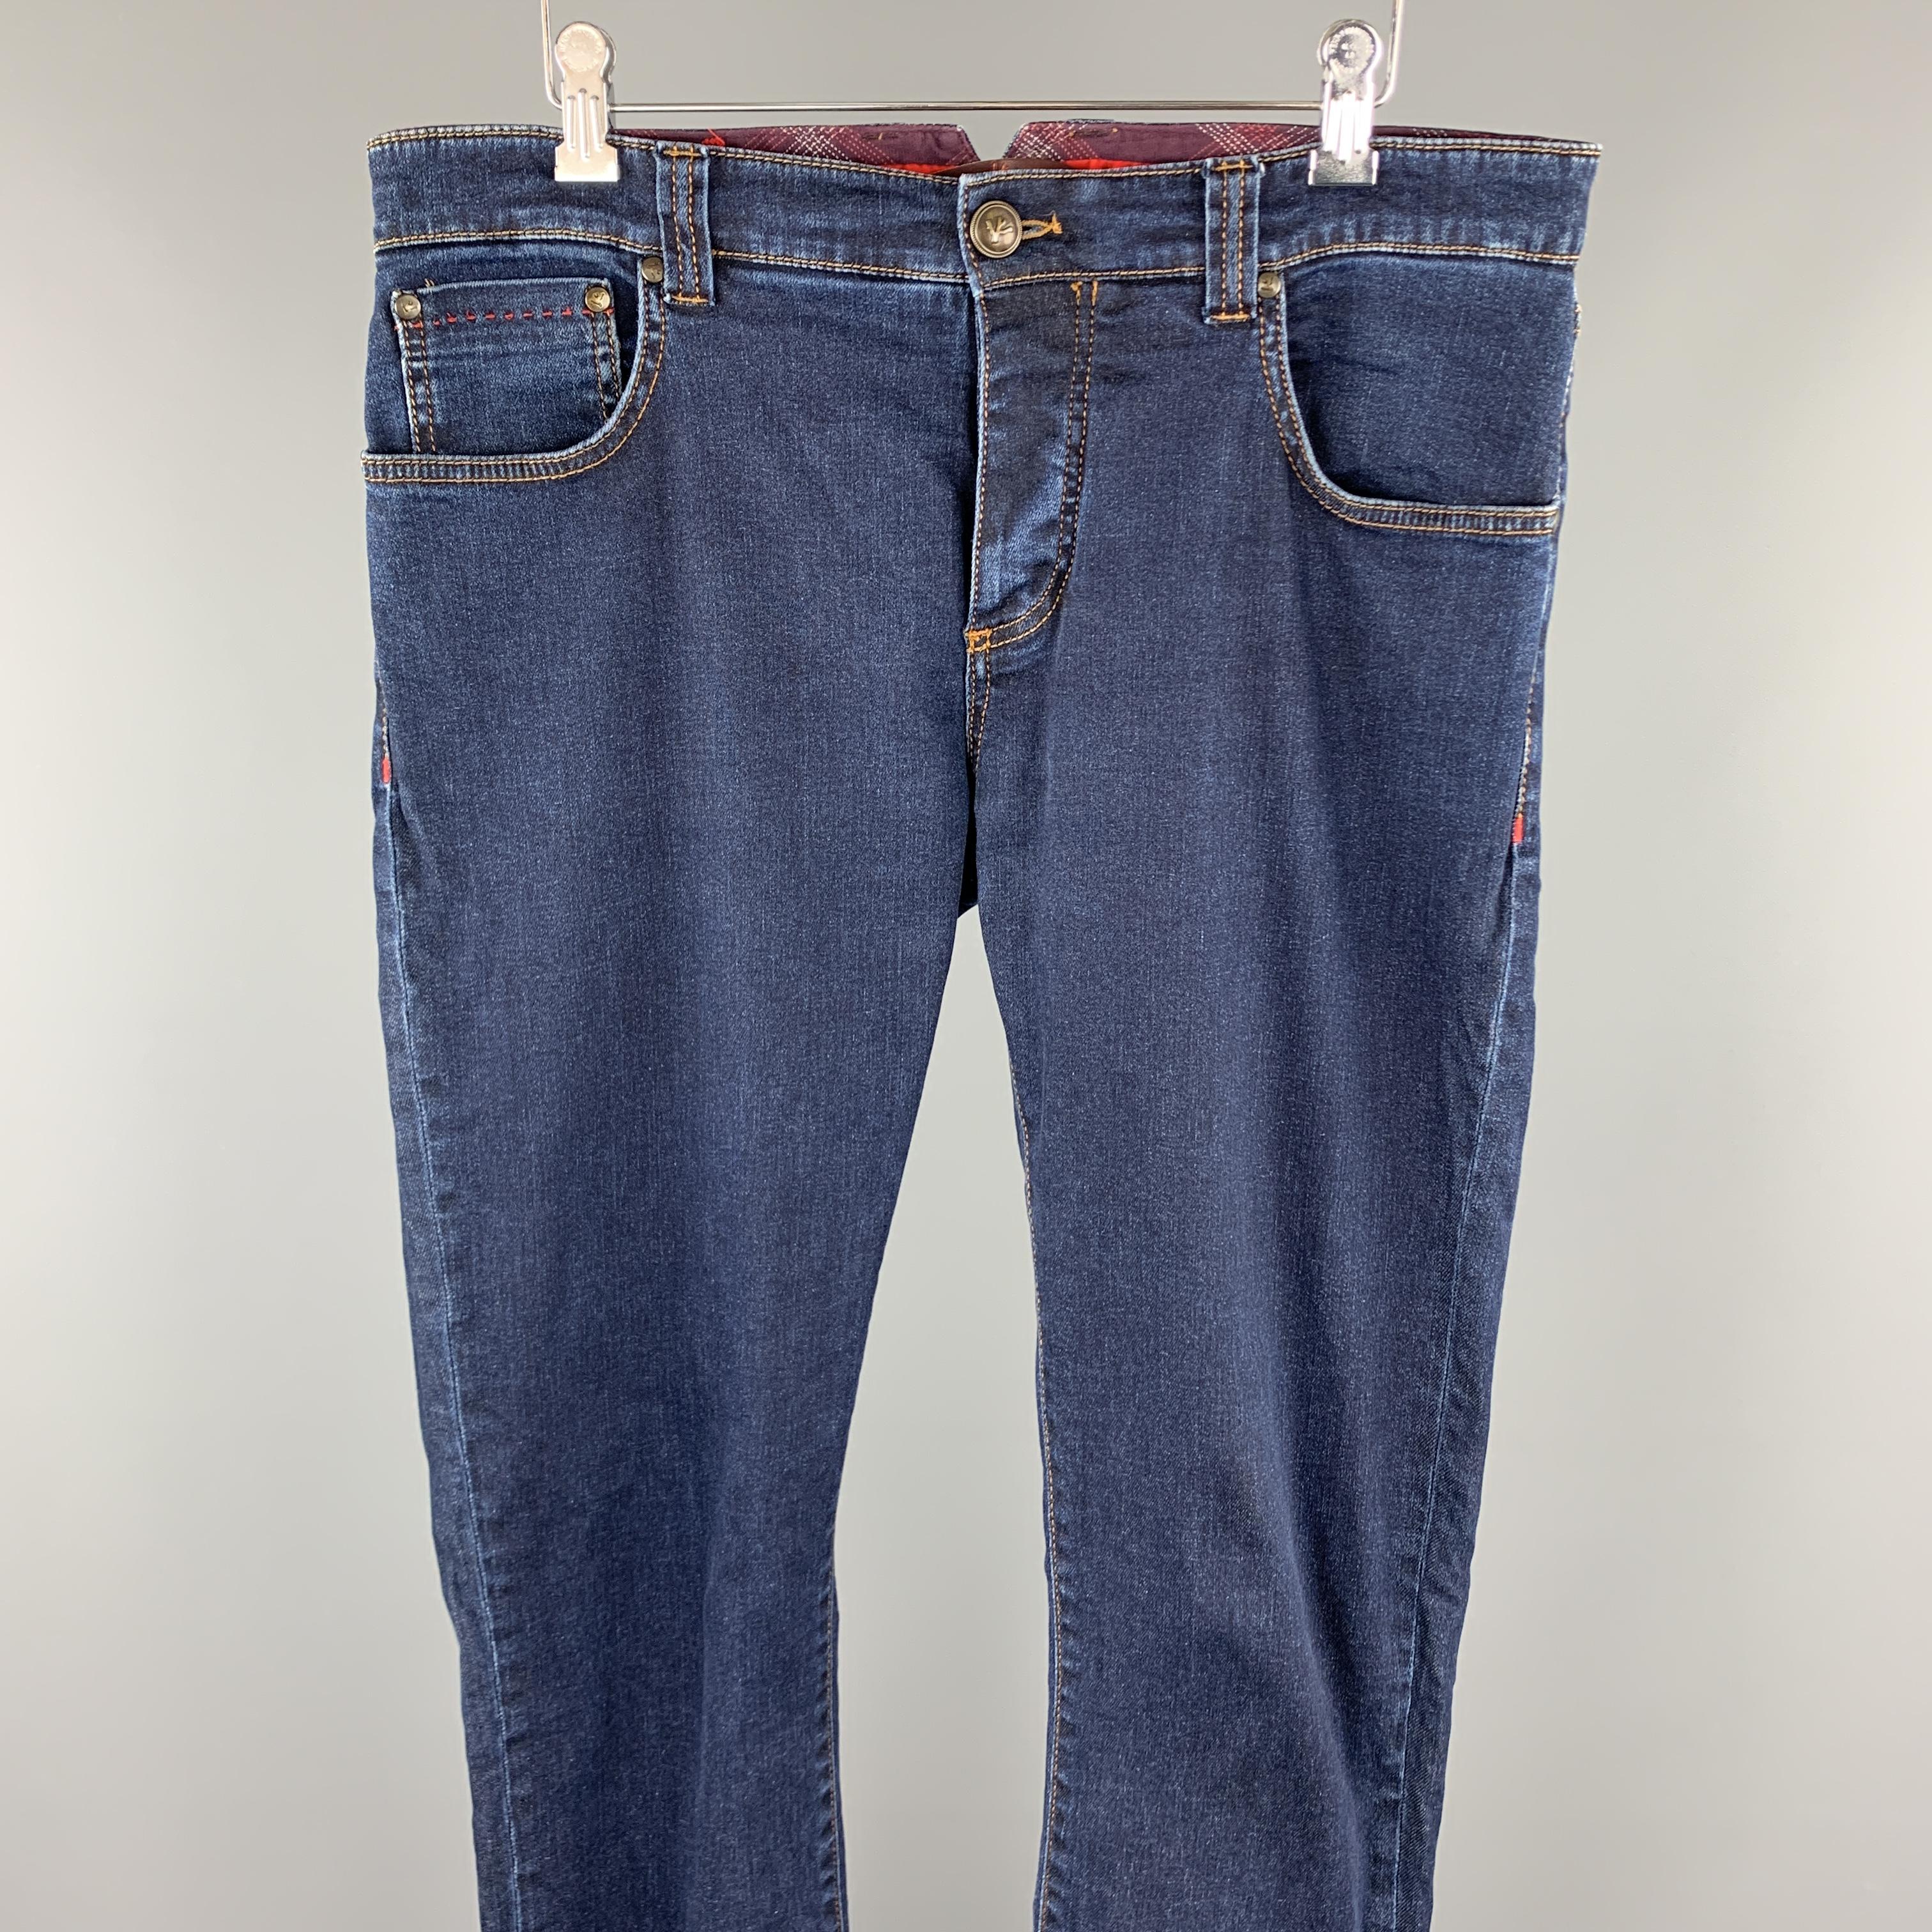 ISAIA jeans comes in a indigo cotton denim featuring contrast stitching and a button fly closure. Made in Italy.

Excellent Pre-Owned Condition.
Marked: IT 34/50

Measurements:

Waist: 34 in. 
Rise: 9 in. 
Inseam: 33 in. 